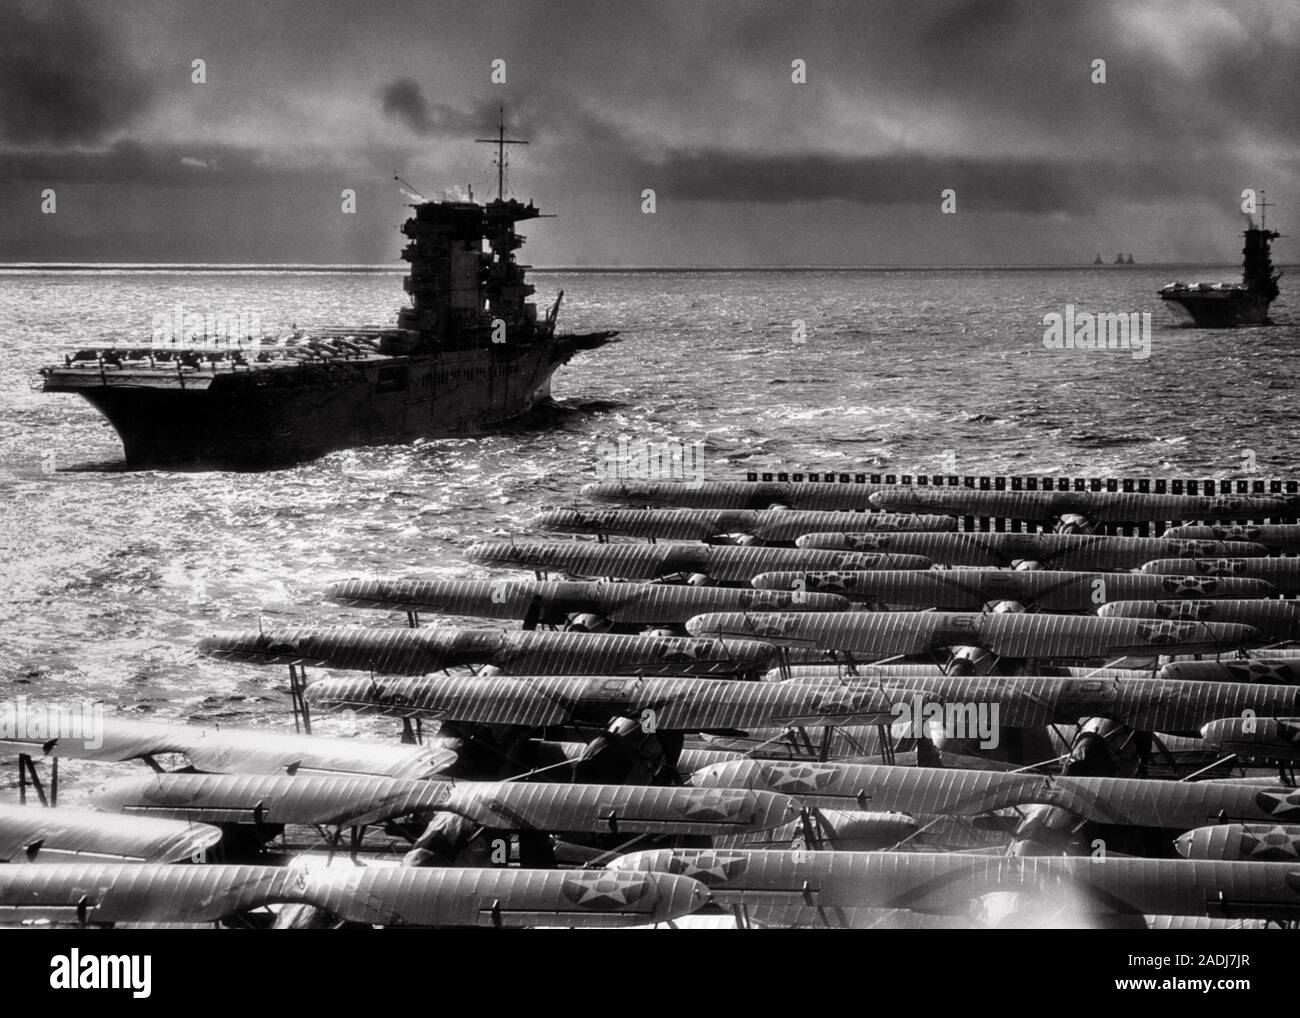 1930s USN PACIFIC FLEET AIRCRAFT CARRIERS SARATOGA AND LEXINGTON SEEN FROM FLIGHT DECK OF CARRIER RANGER BEFORE WORLD WAR II  - n143 HAR001 HARS CARRIERS USN FLIGHT DECK PACIFIC OCEAN SARATOGA SEEN BIPLANES BLACK AND WHITE HAR001 OLD FASHIONED RANGER Stock Photo